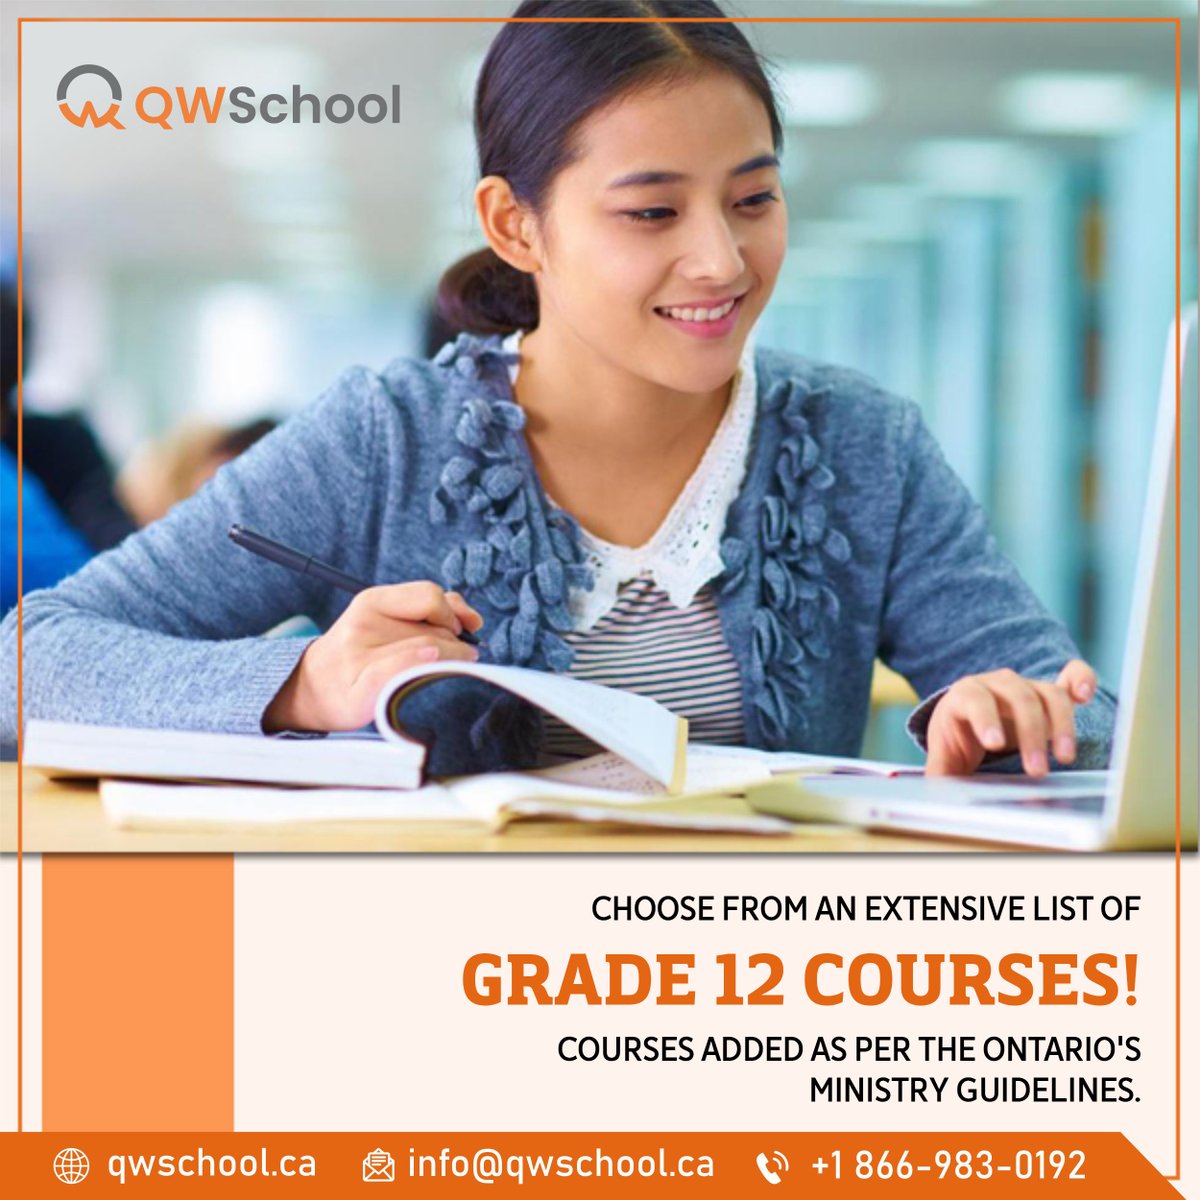 Our grade 12 teaching courses are well-designed to keep them resourceful. Every course complies with Ministry’s guidelines. Call on +1 866-983-0192 or send us your inquiry at qwschool.ca/grade-12/

#canadastudents #canadianschools  #qwschool